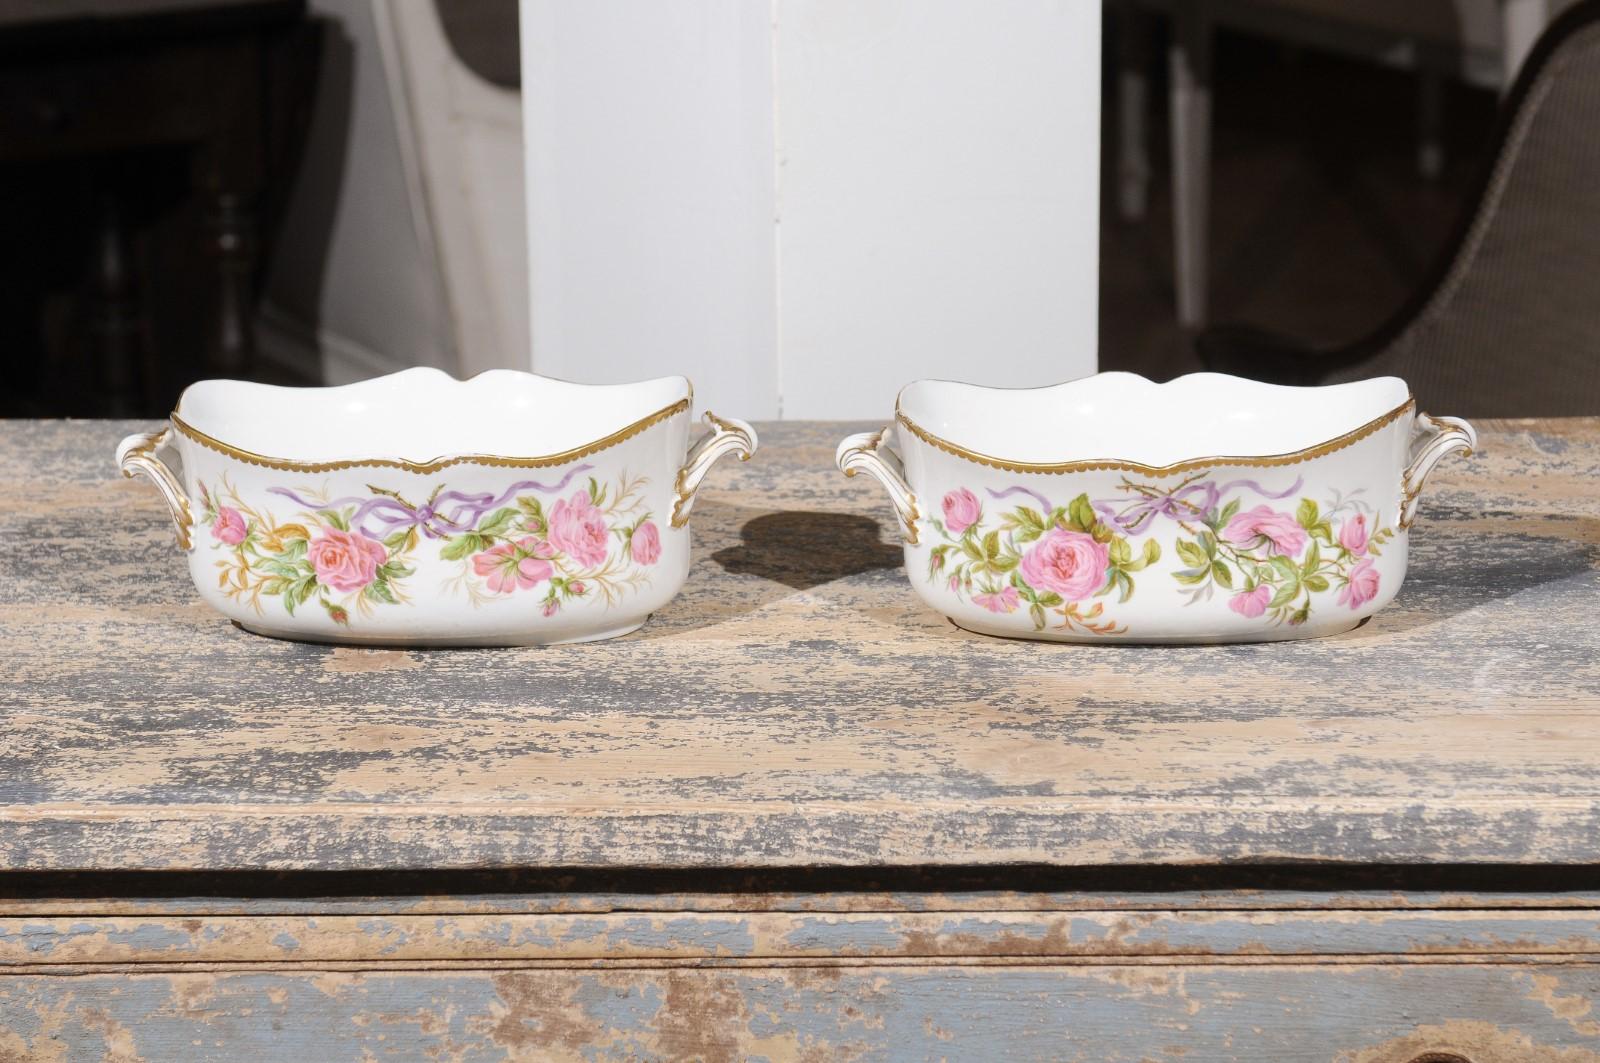 English Porcelain Bowls Depicting Bouquets of Pink Roses with Gilt Accents For Sale 1